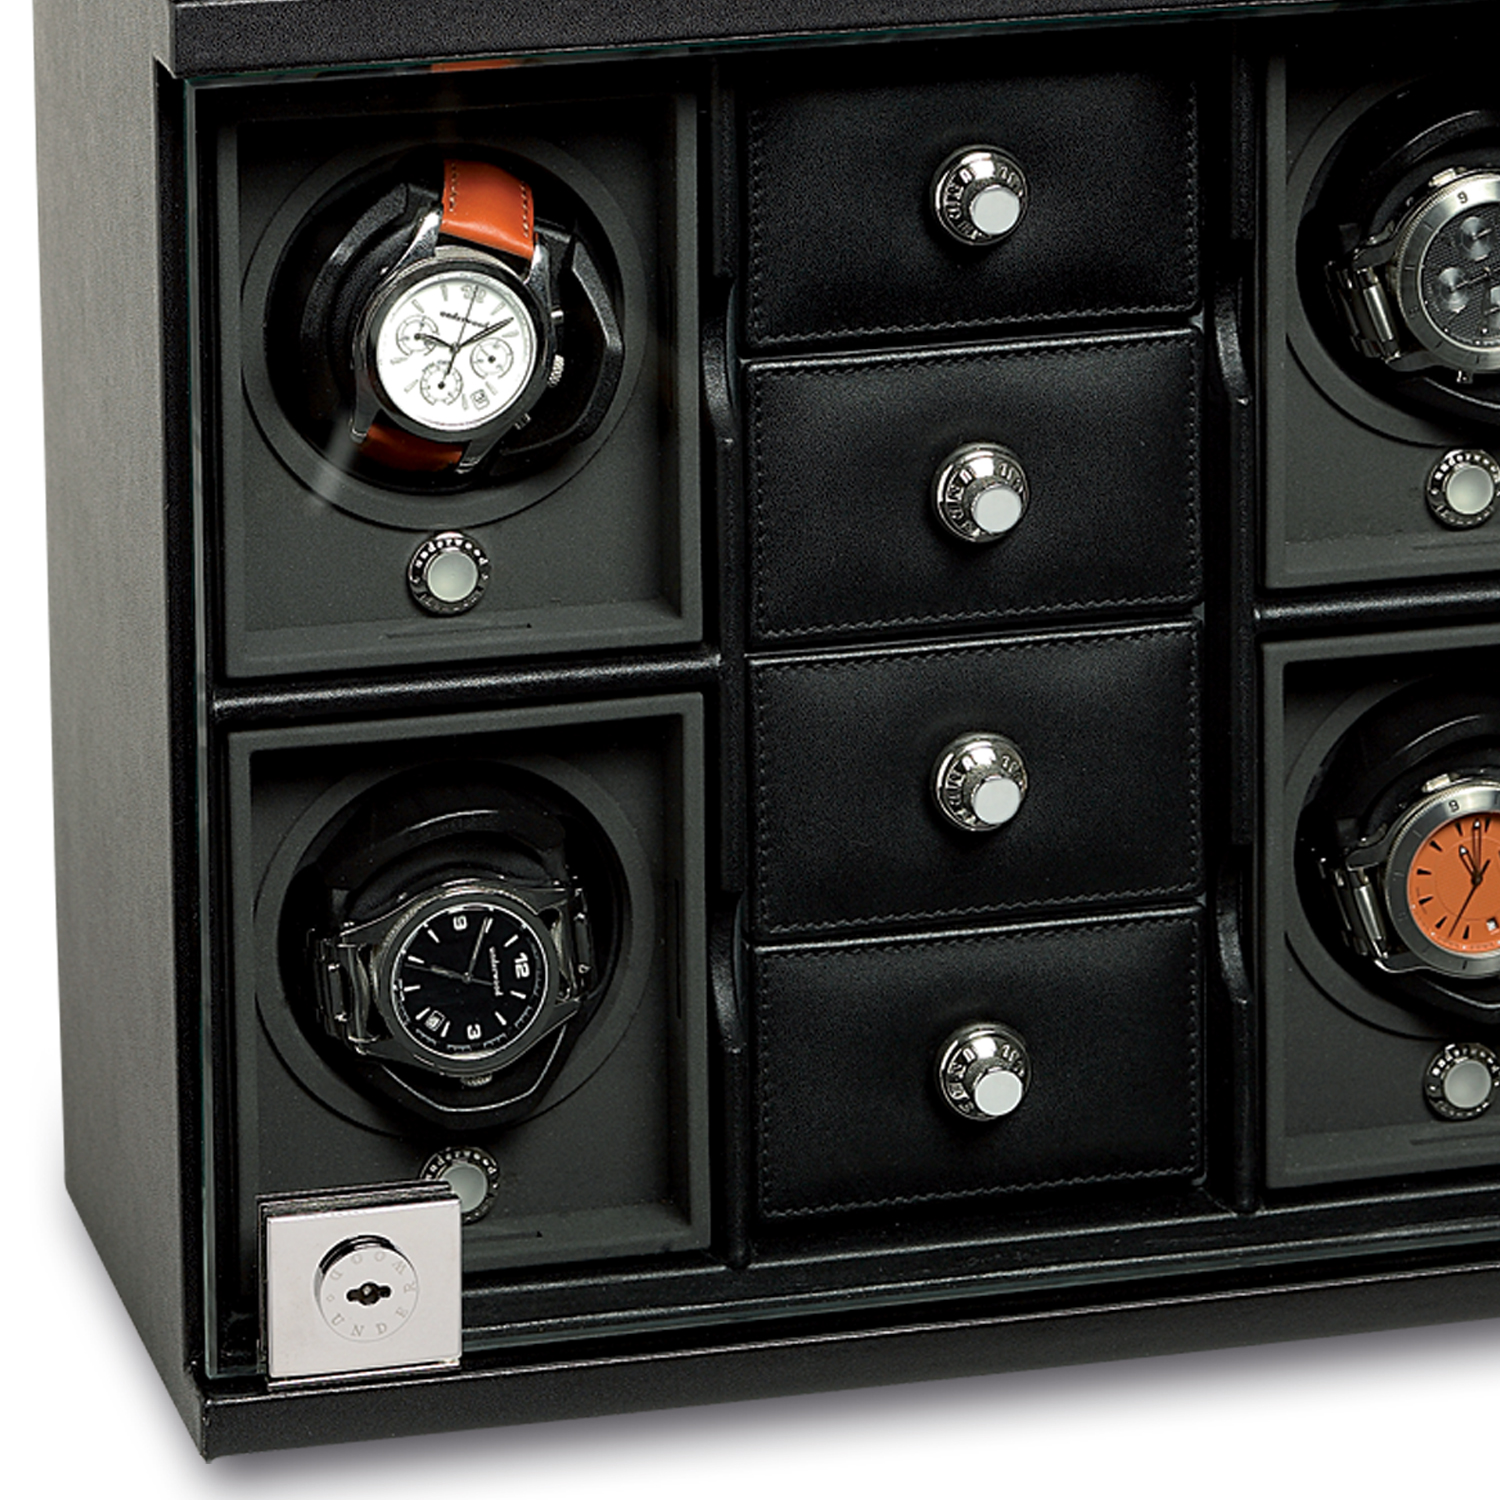 Watch Winder and Modules for 4 Watches with Trays